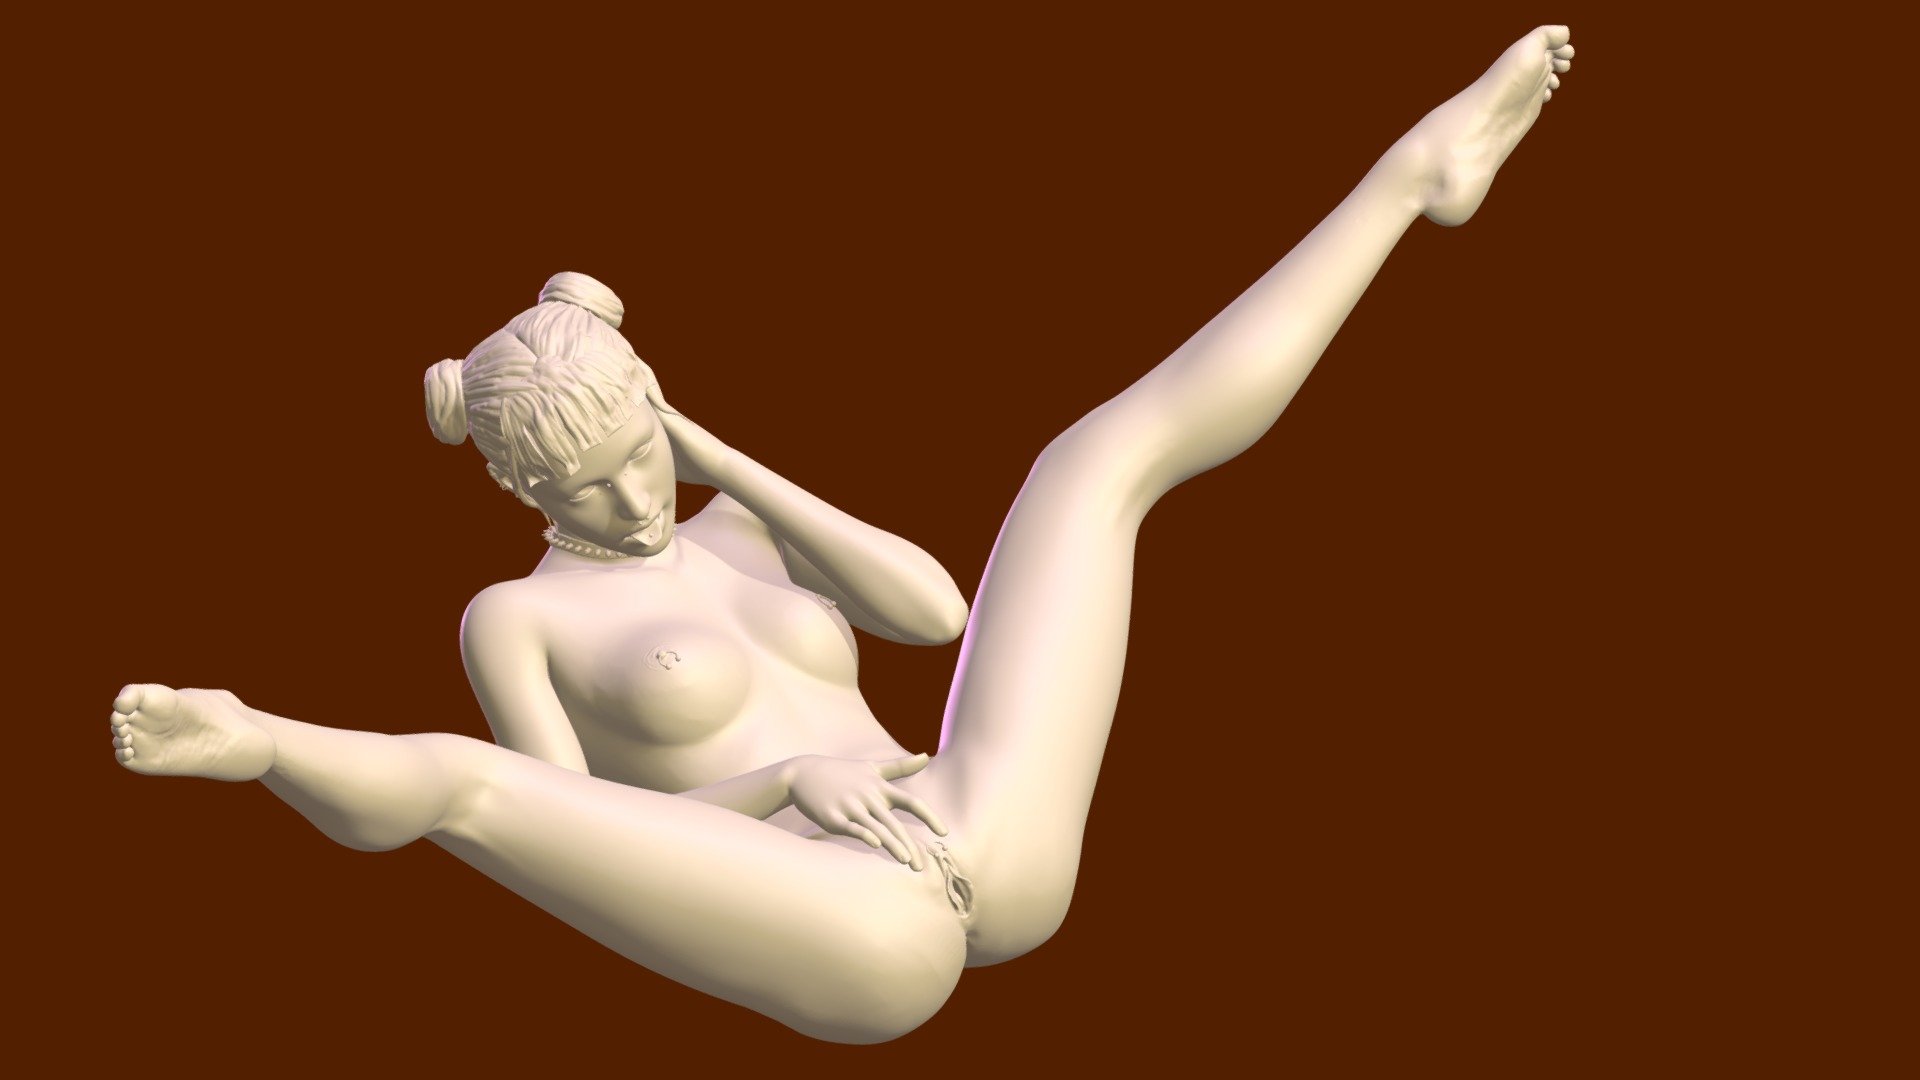 Female body mess. You can download this model in my link, thanks!
https://cults3d.com/en/design-collections - Agaheo 003 - 3D model by GalaB 3d model